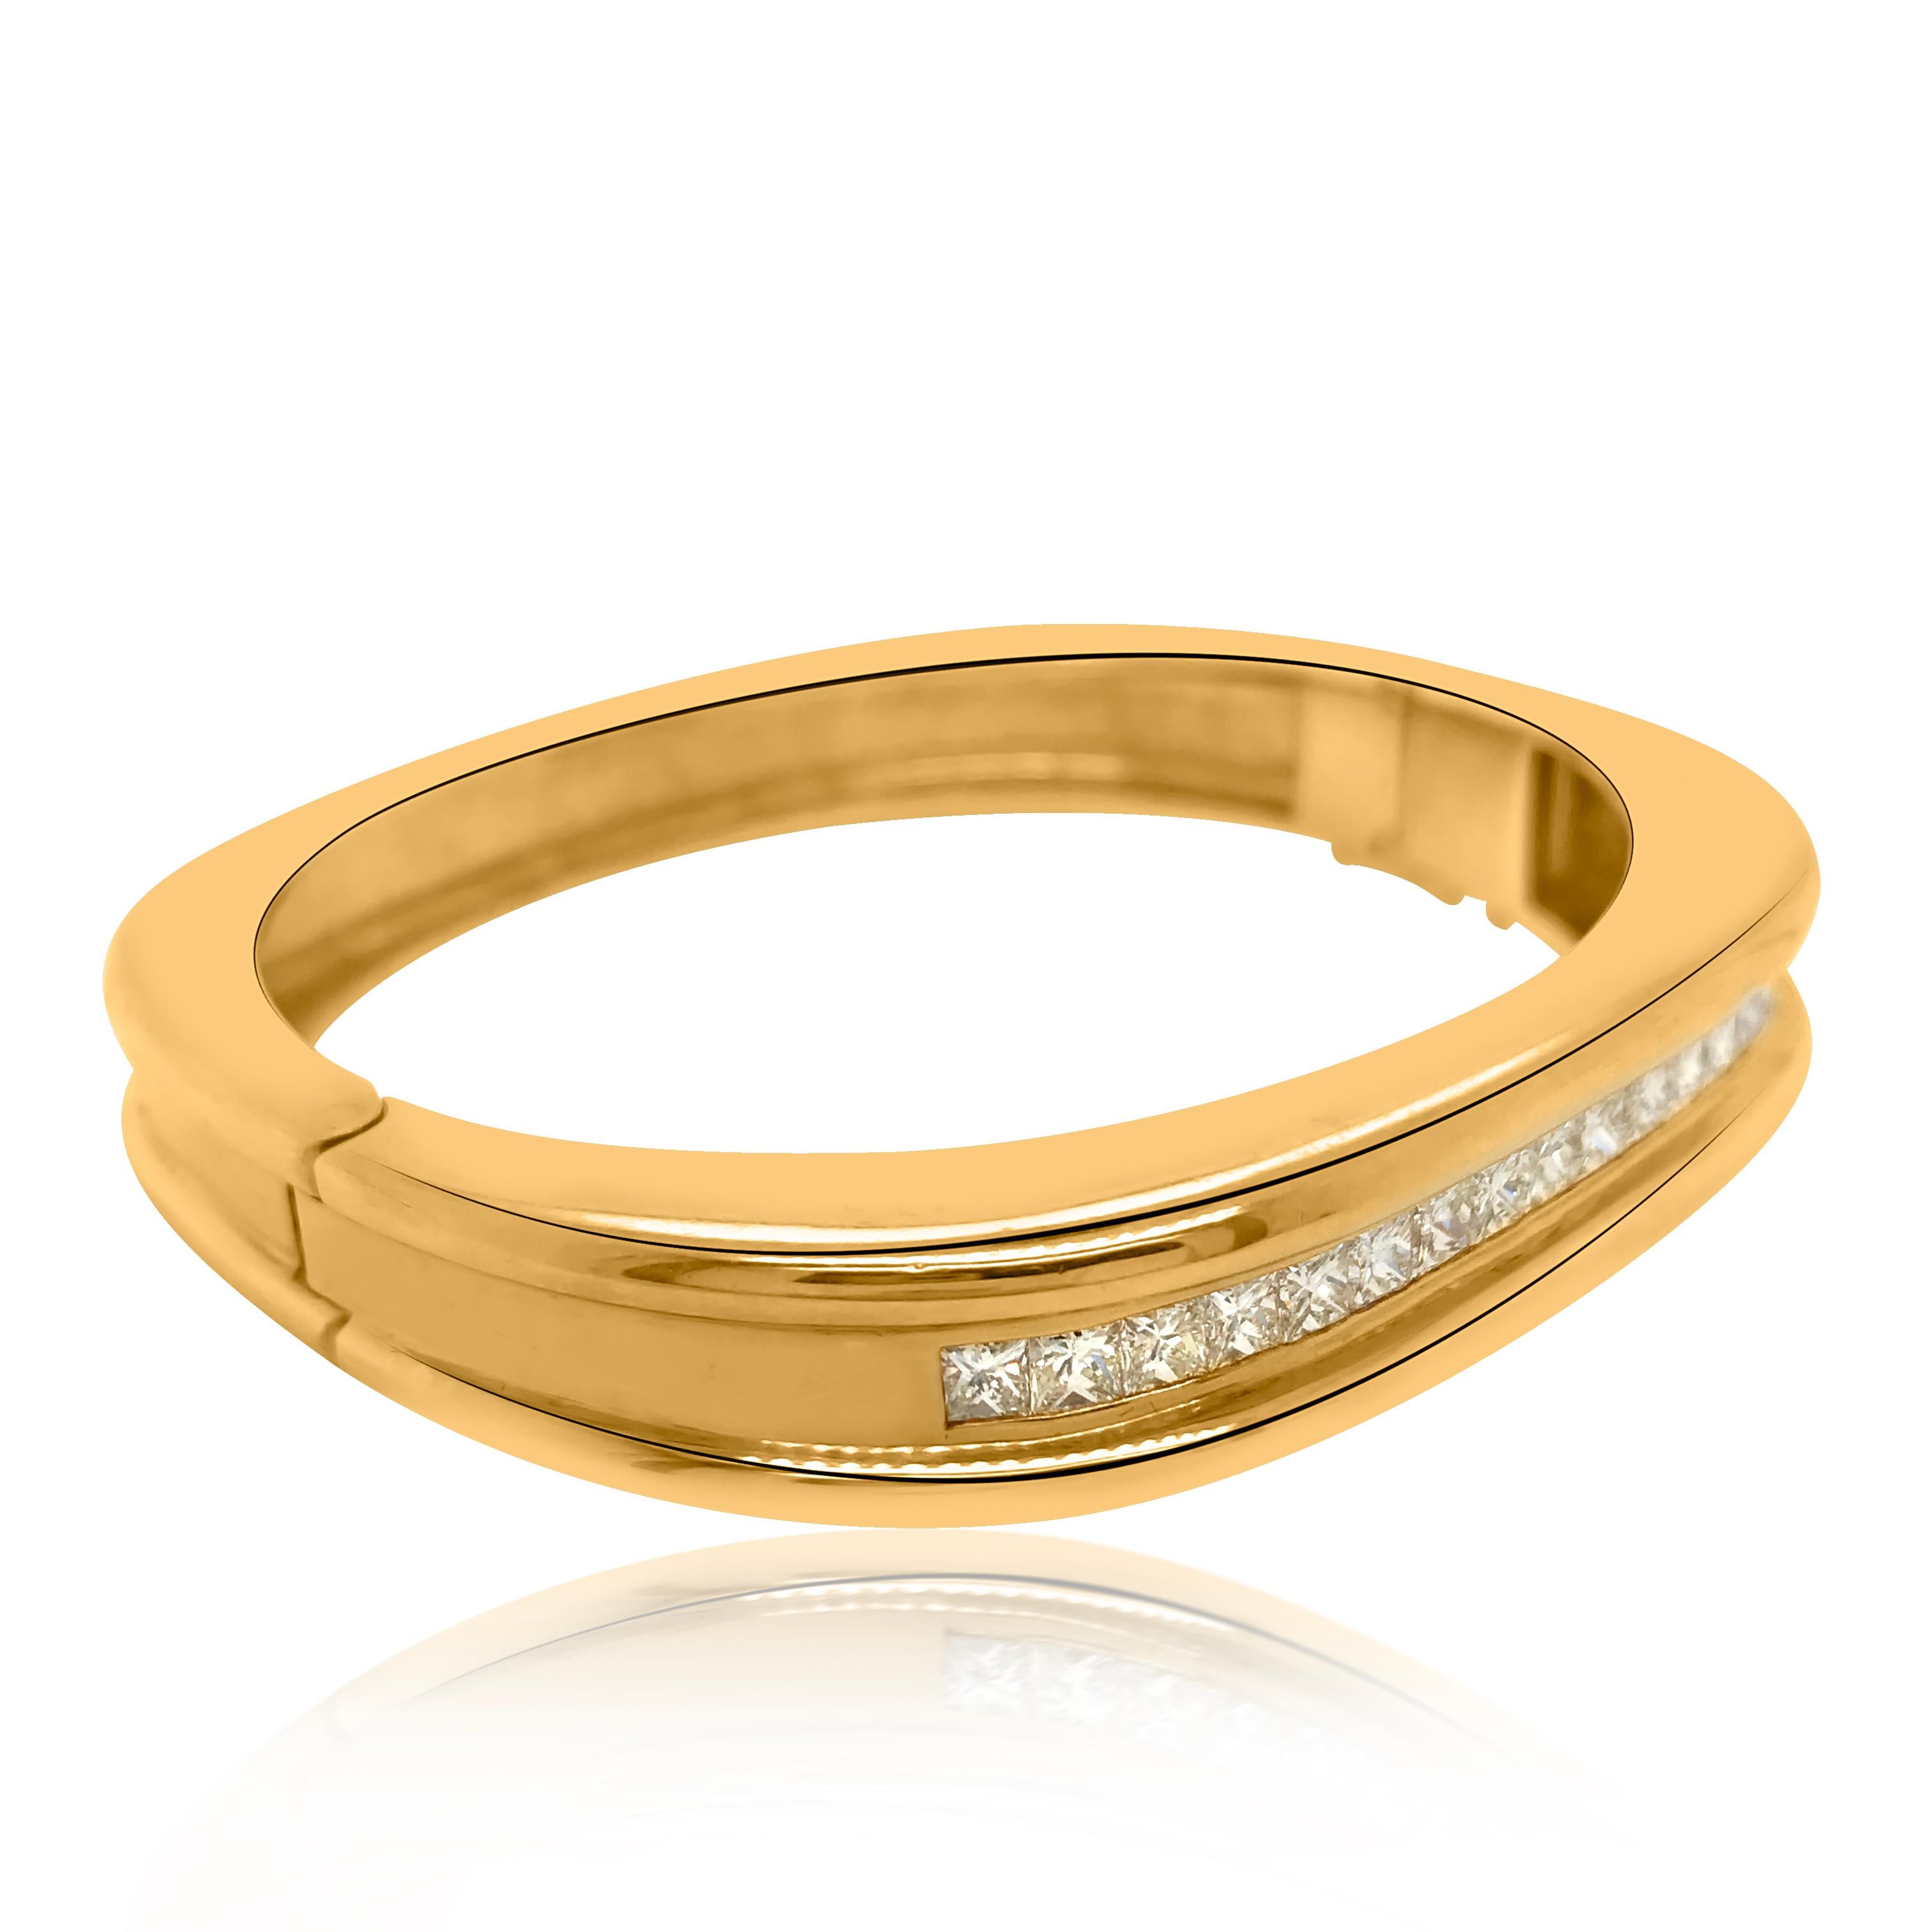 This vintage 1970s bangle bracelet of classic elegance and simplicity is crafted in 18 Karat yellow gold, weighing 60 grams and measuring 6*5.5 cm. The bangle bracelet is enriched with princess-cut diamonds deep-mounted along the middle of the